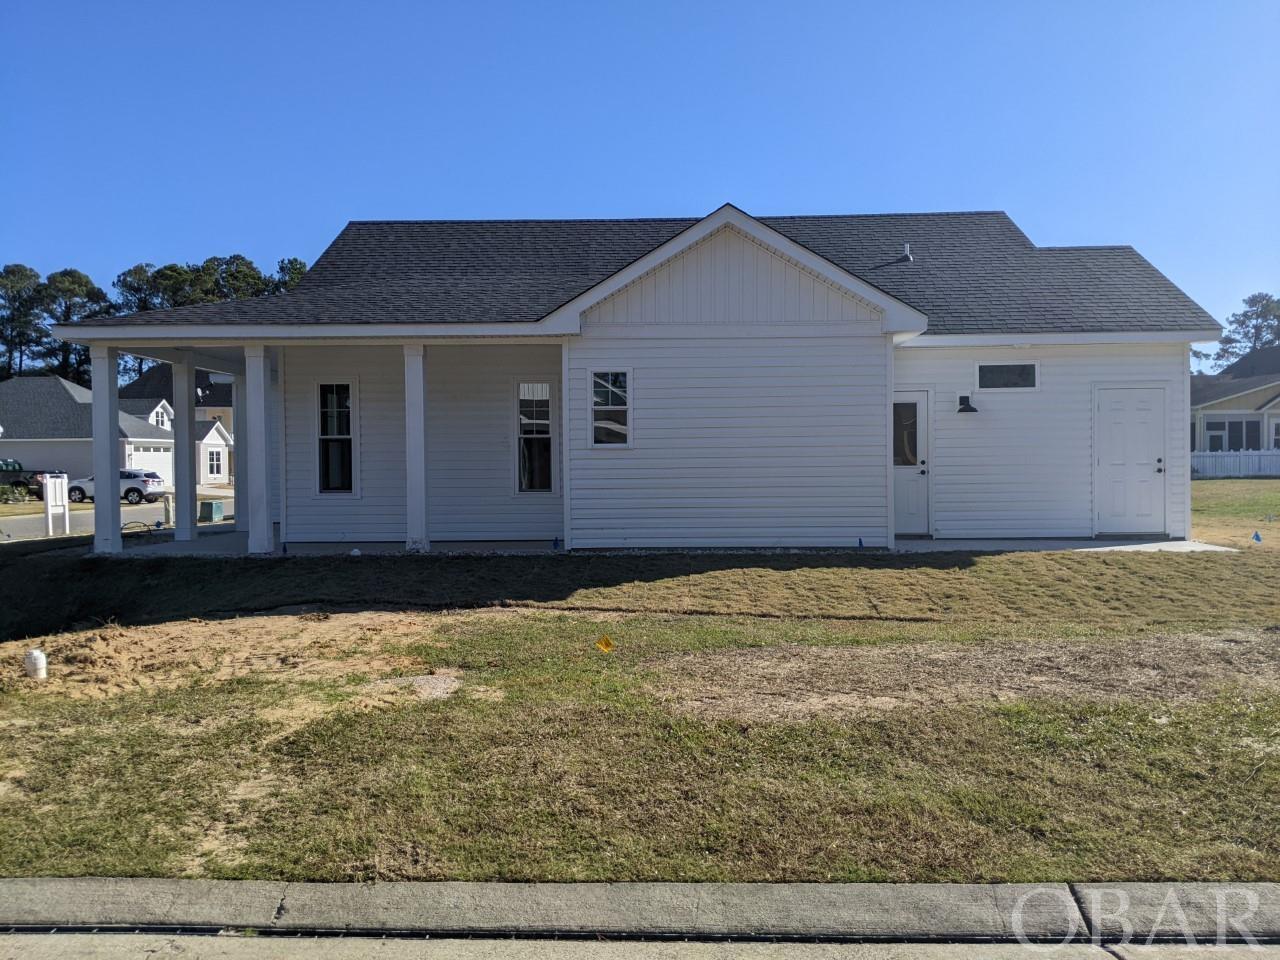 107 Transom Drive, Grandy, NC 27939, 3 Bedrooms Bedrooms, ,2 BathroomsBathrooms,Residential,For sale,Transom Drive,120904